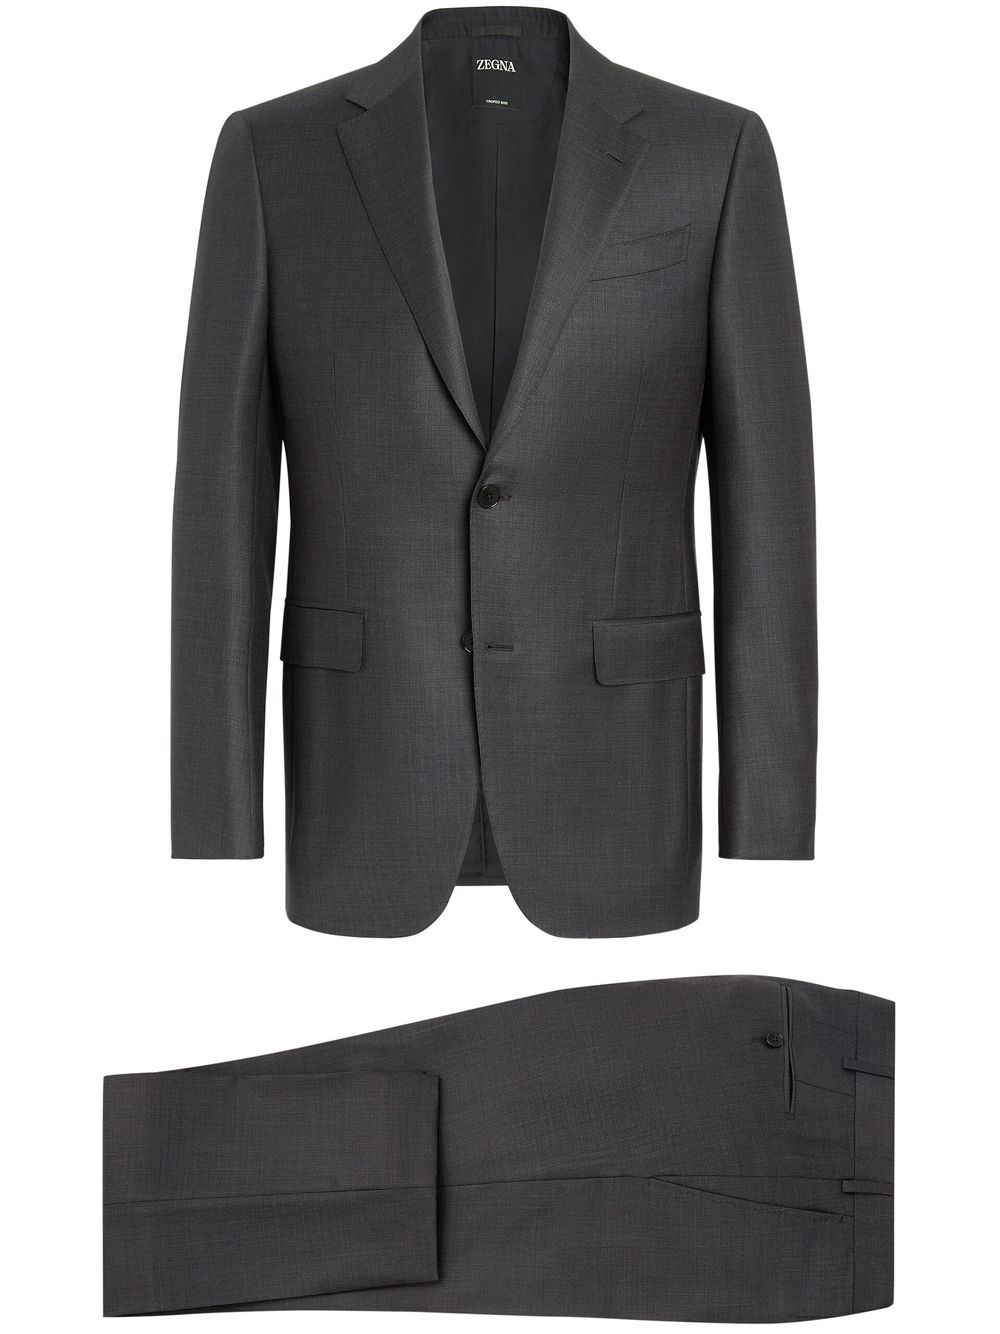 Zegna Trofeo single-breasted wool suit - Grey von Zegna